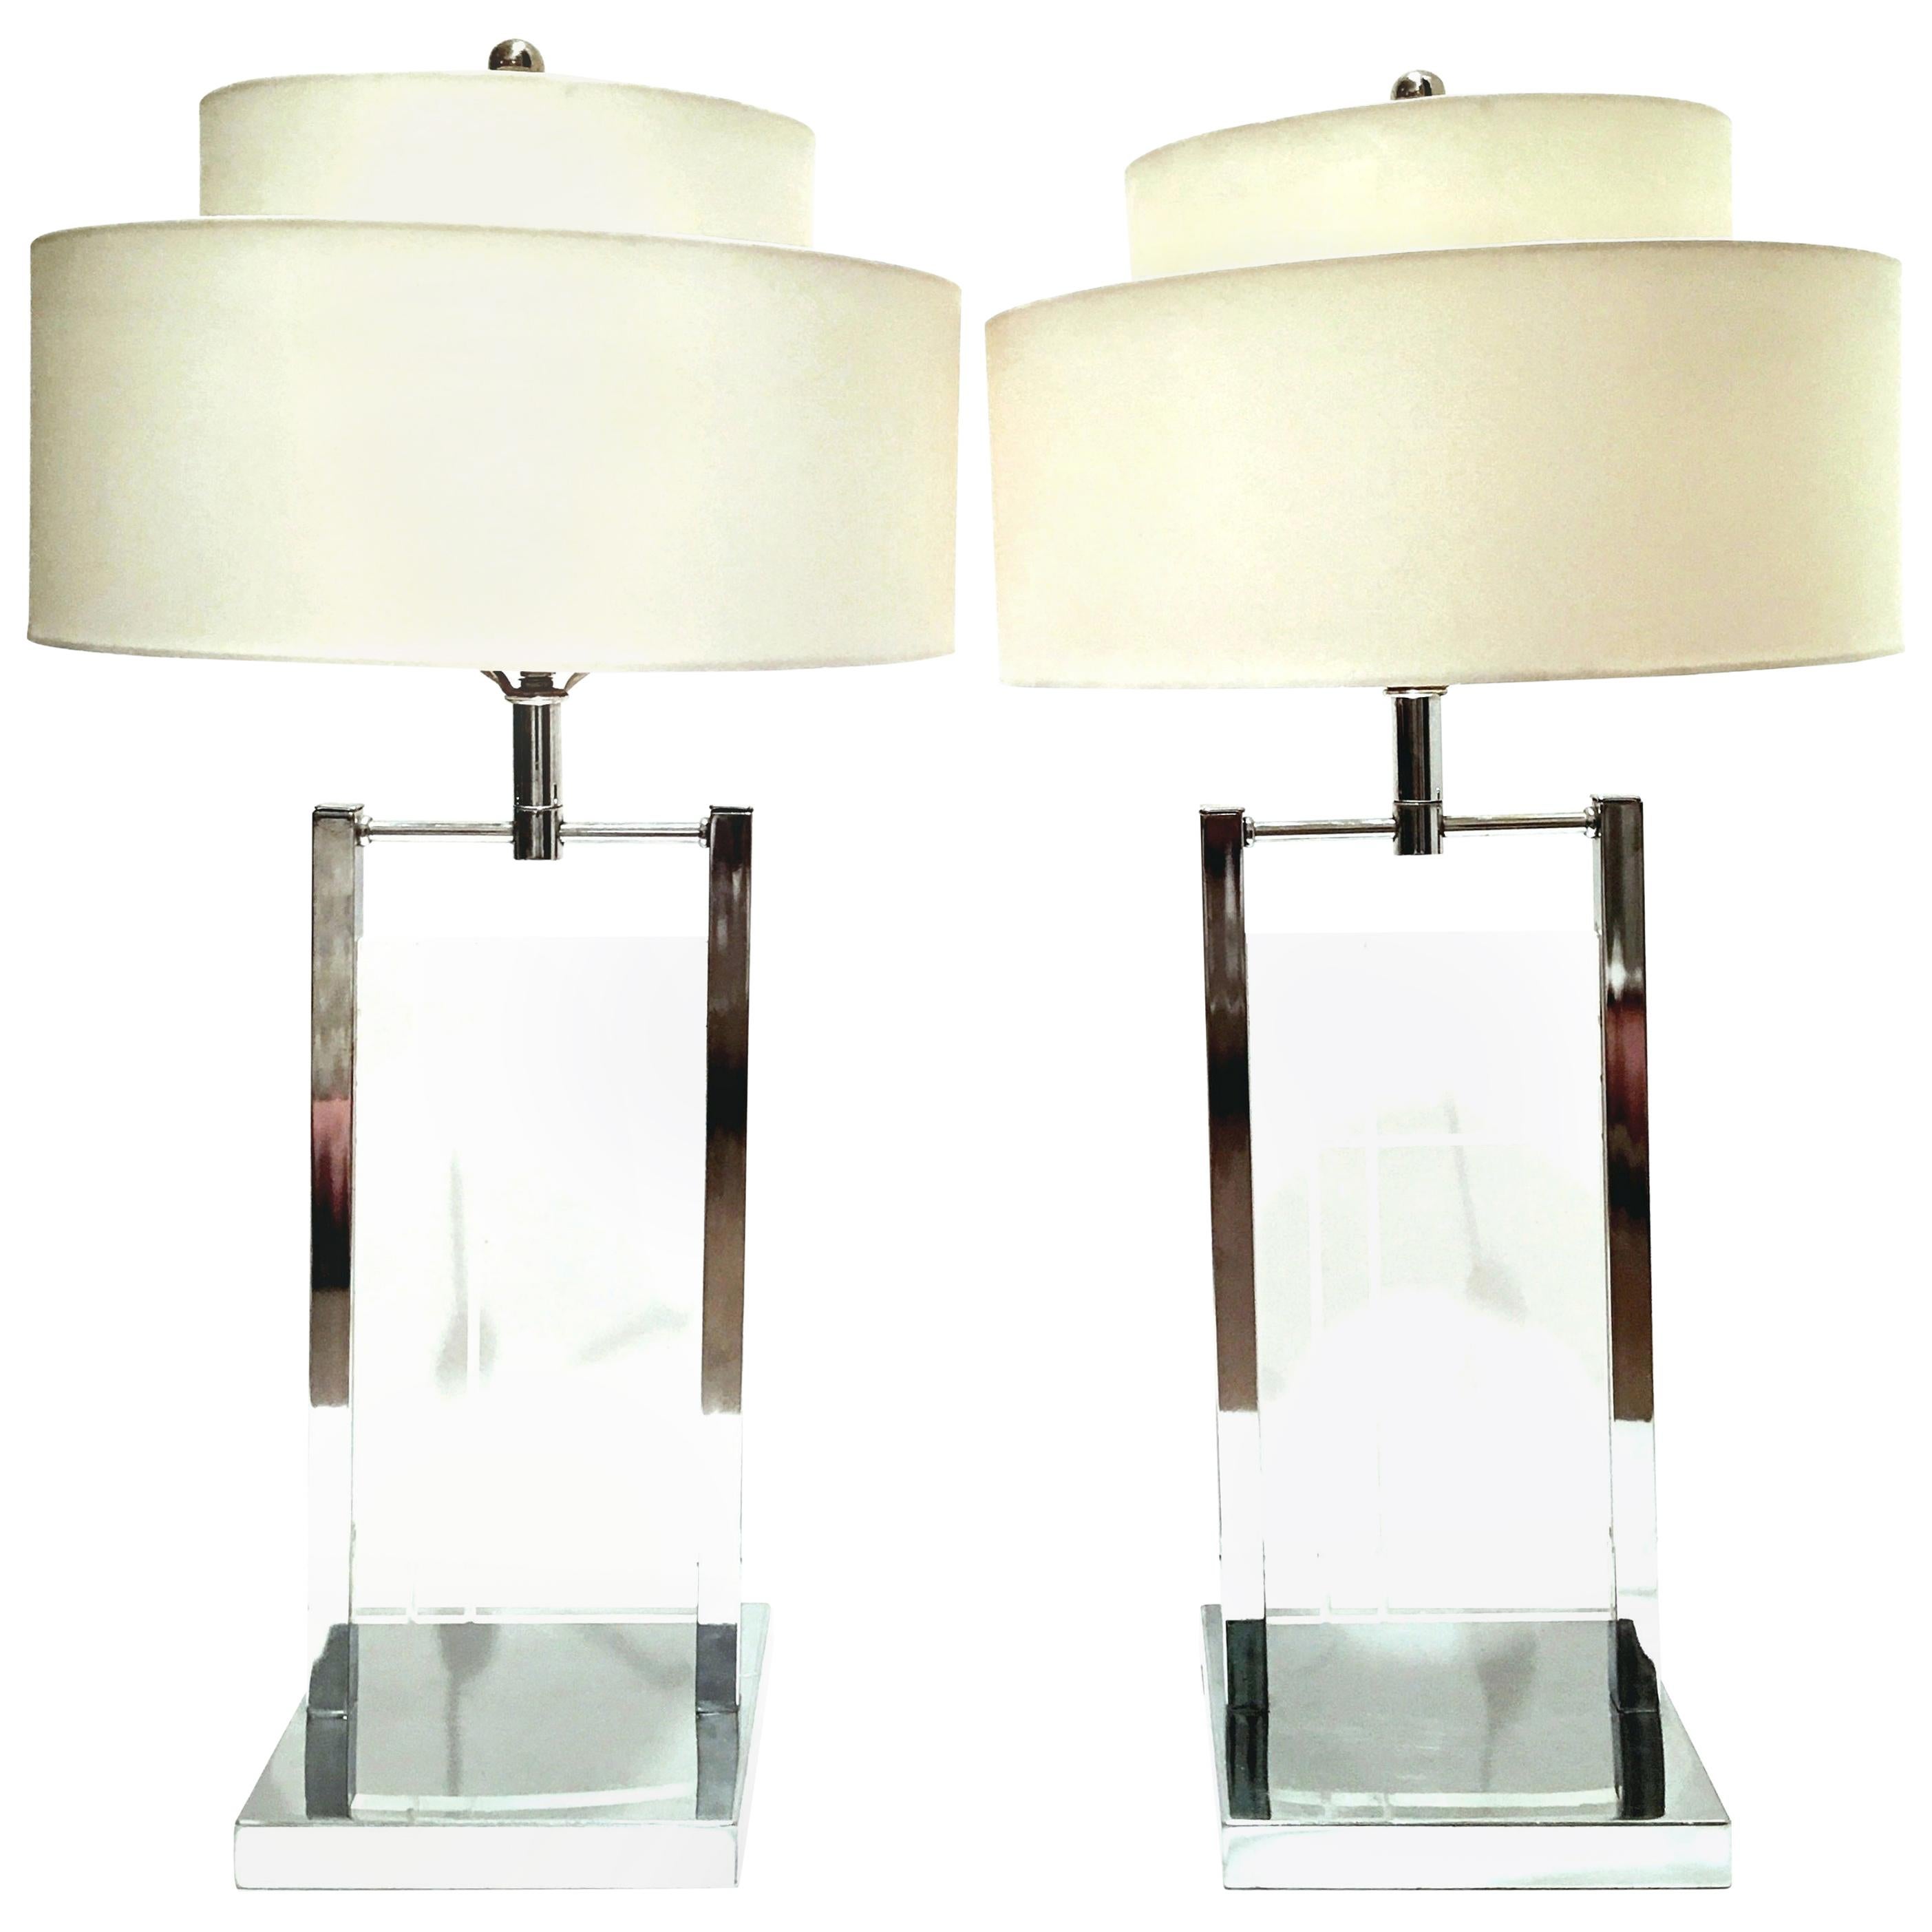 1970s Pair of Etched Lucite and Chrome Table Lamps by, George Kovacs For Sale